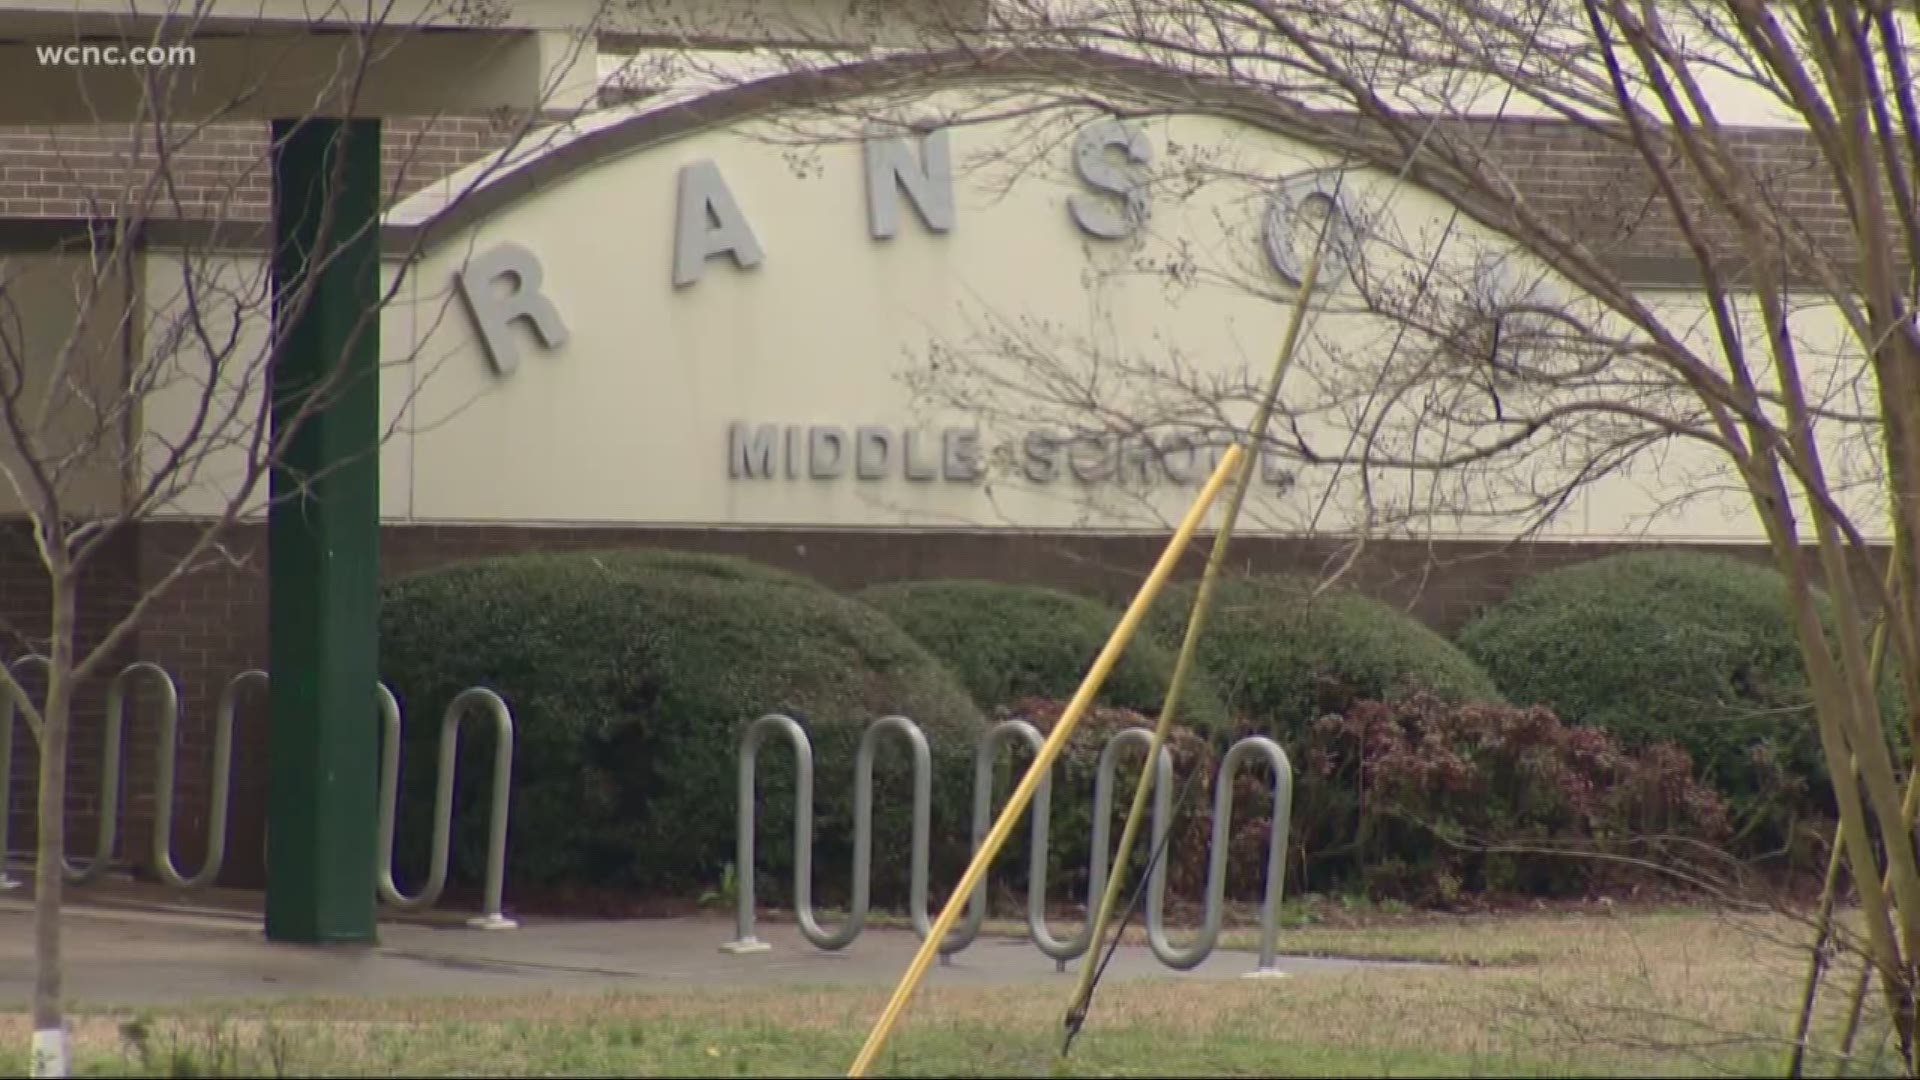 Ranson Middle School found an unloaded gun in an outdoor trash can on campus. A day before a gun was found on a student at South Mecklenburg High School.